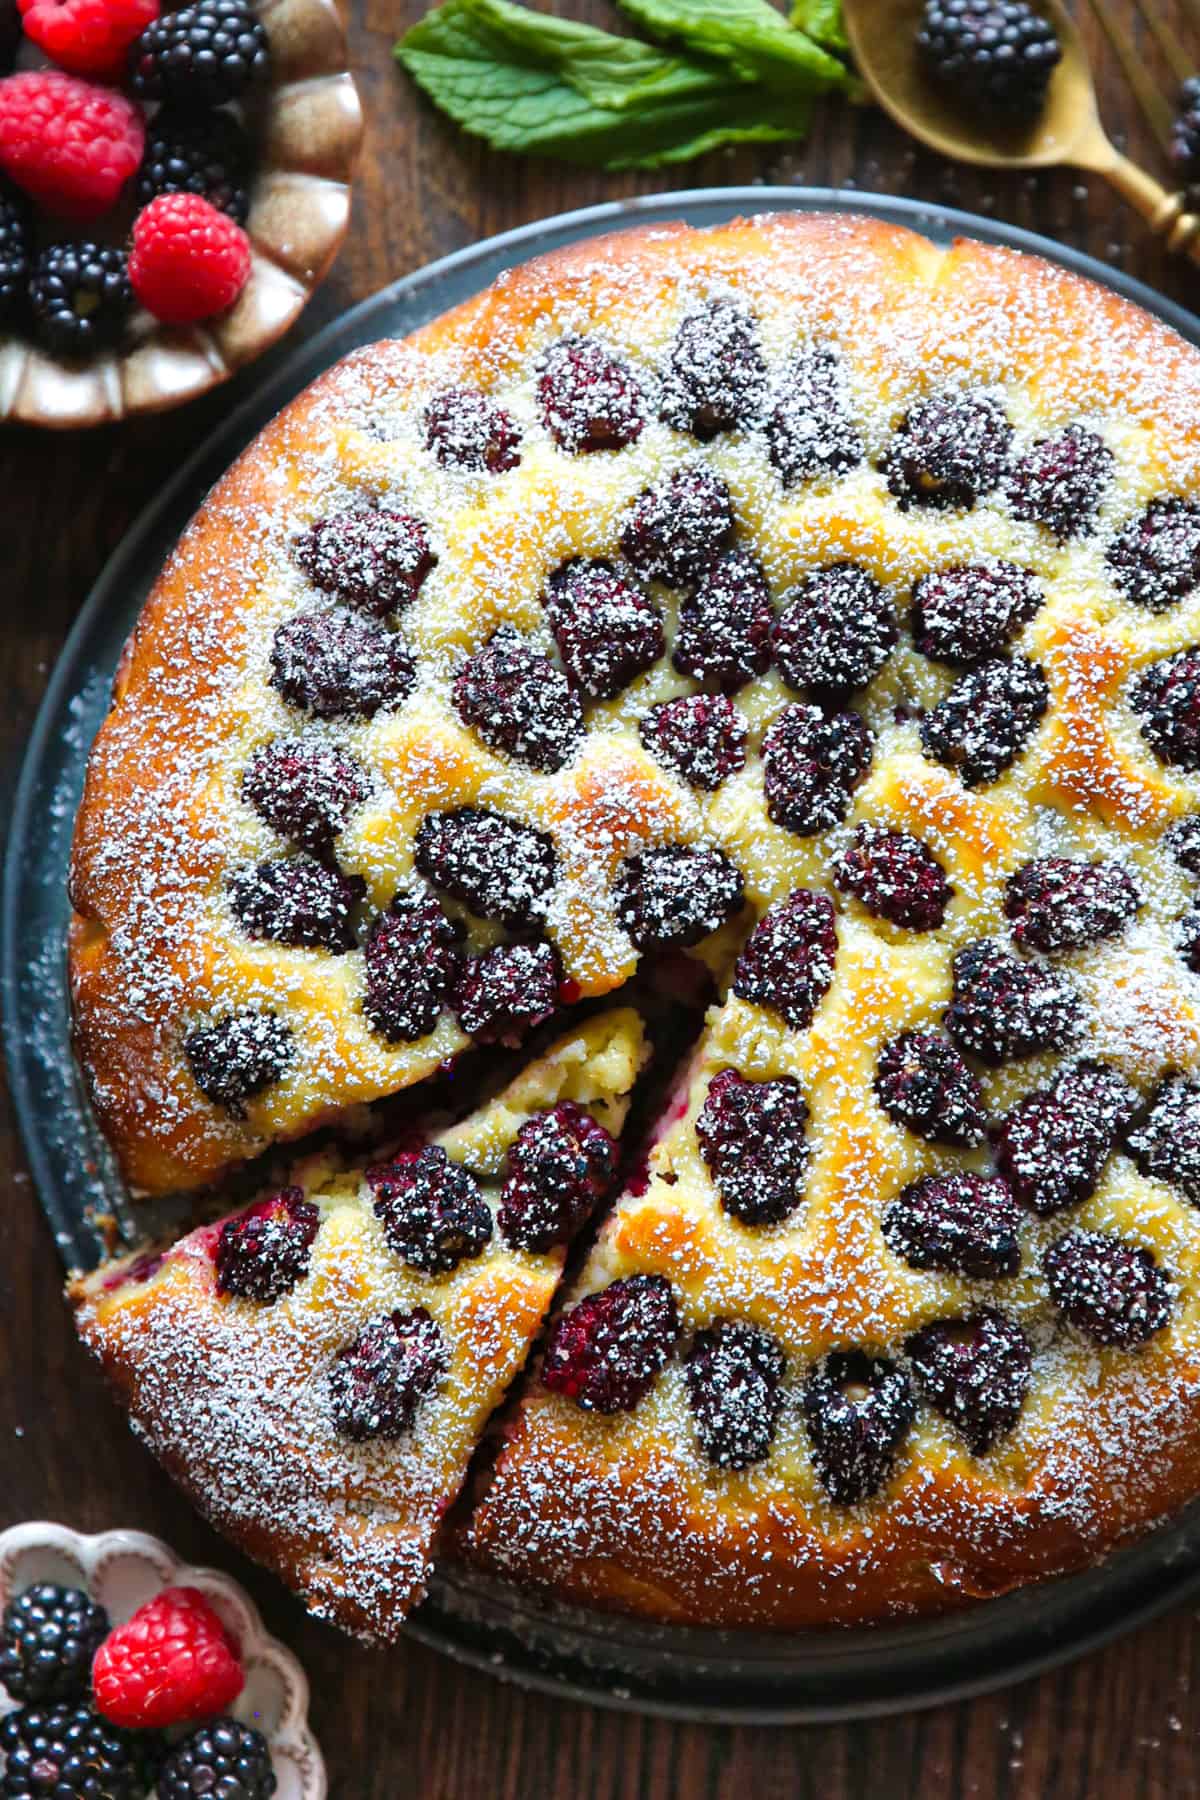 blackberry cake (dusted with powdered sugar).